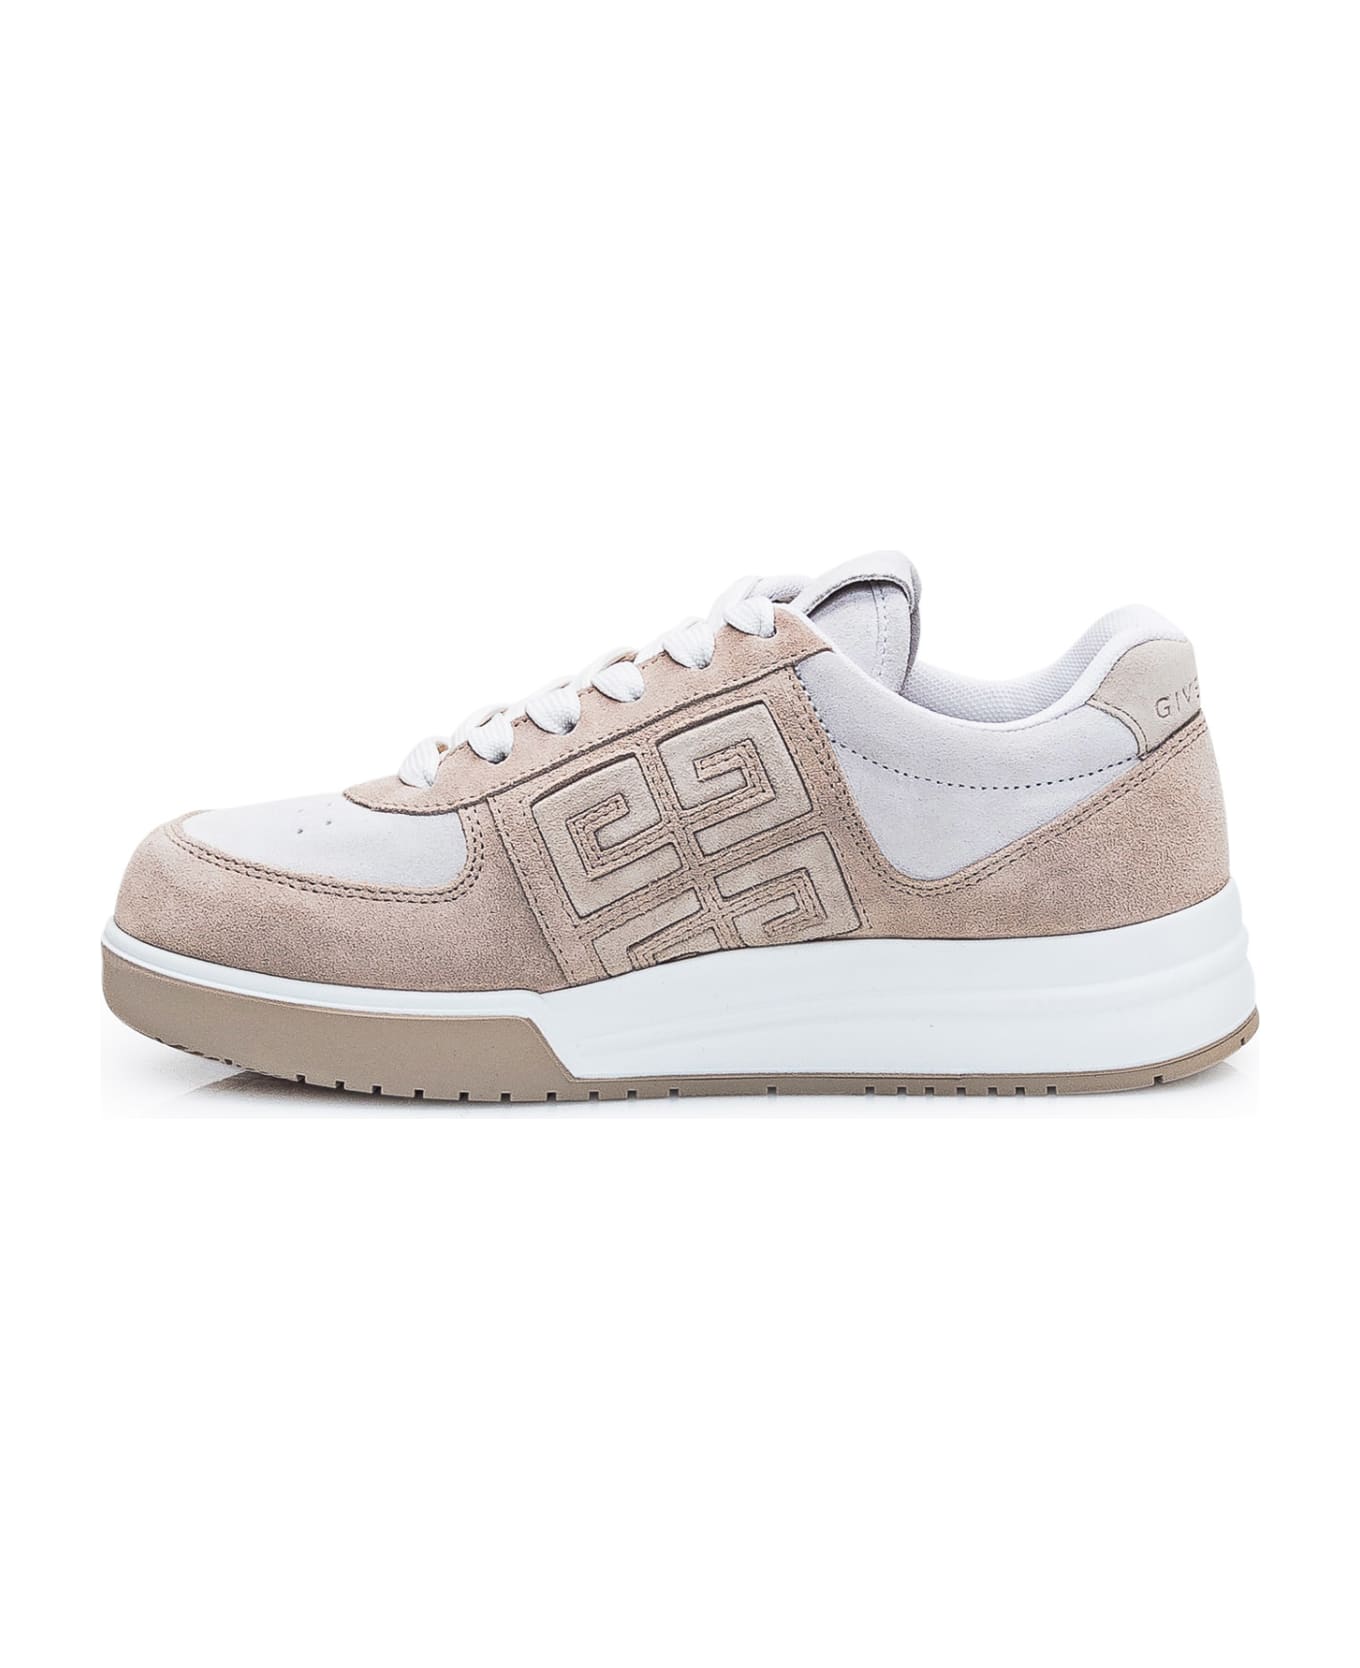 Givenchy G4 Sneaker - BEIGE WHITE